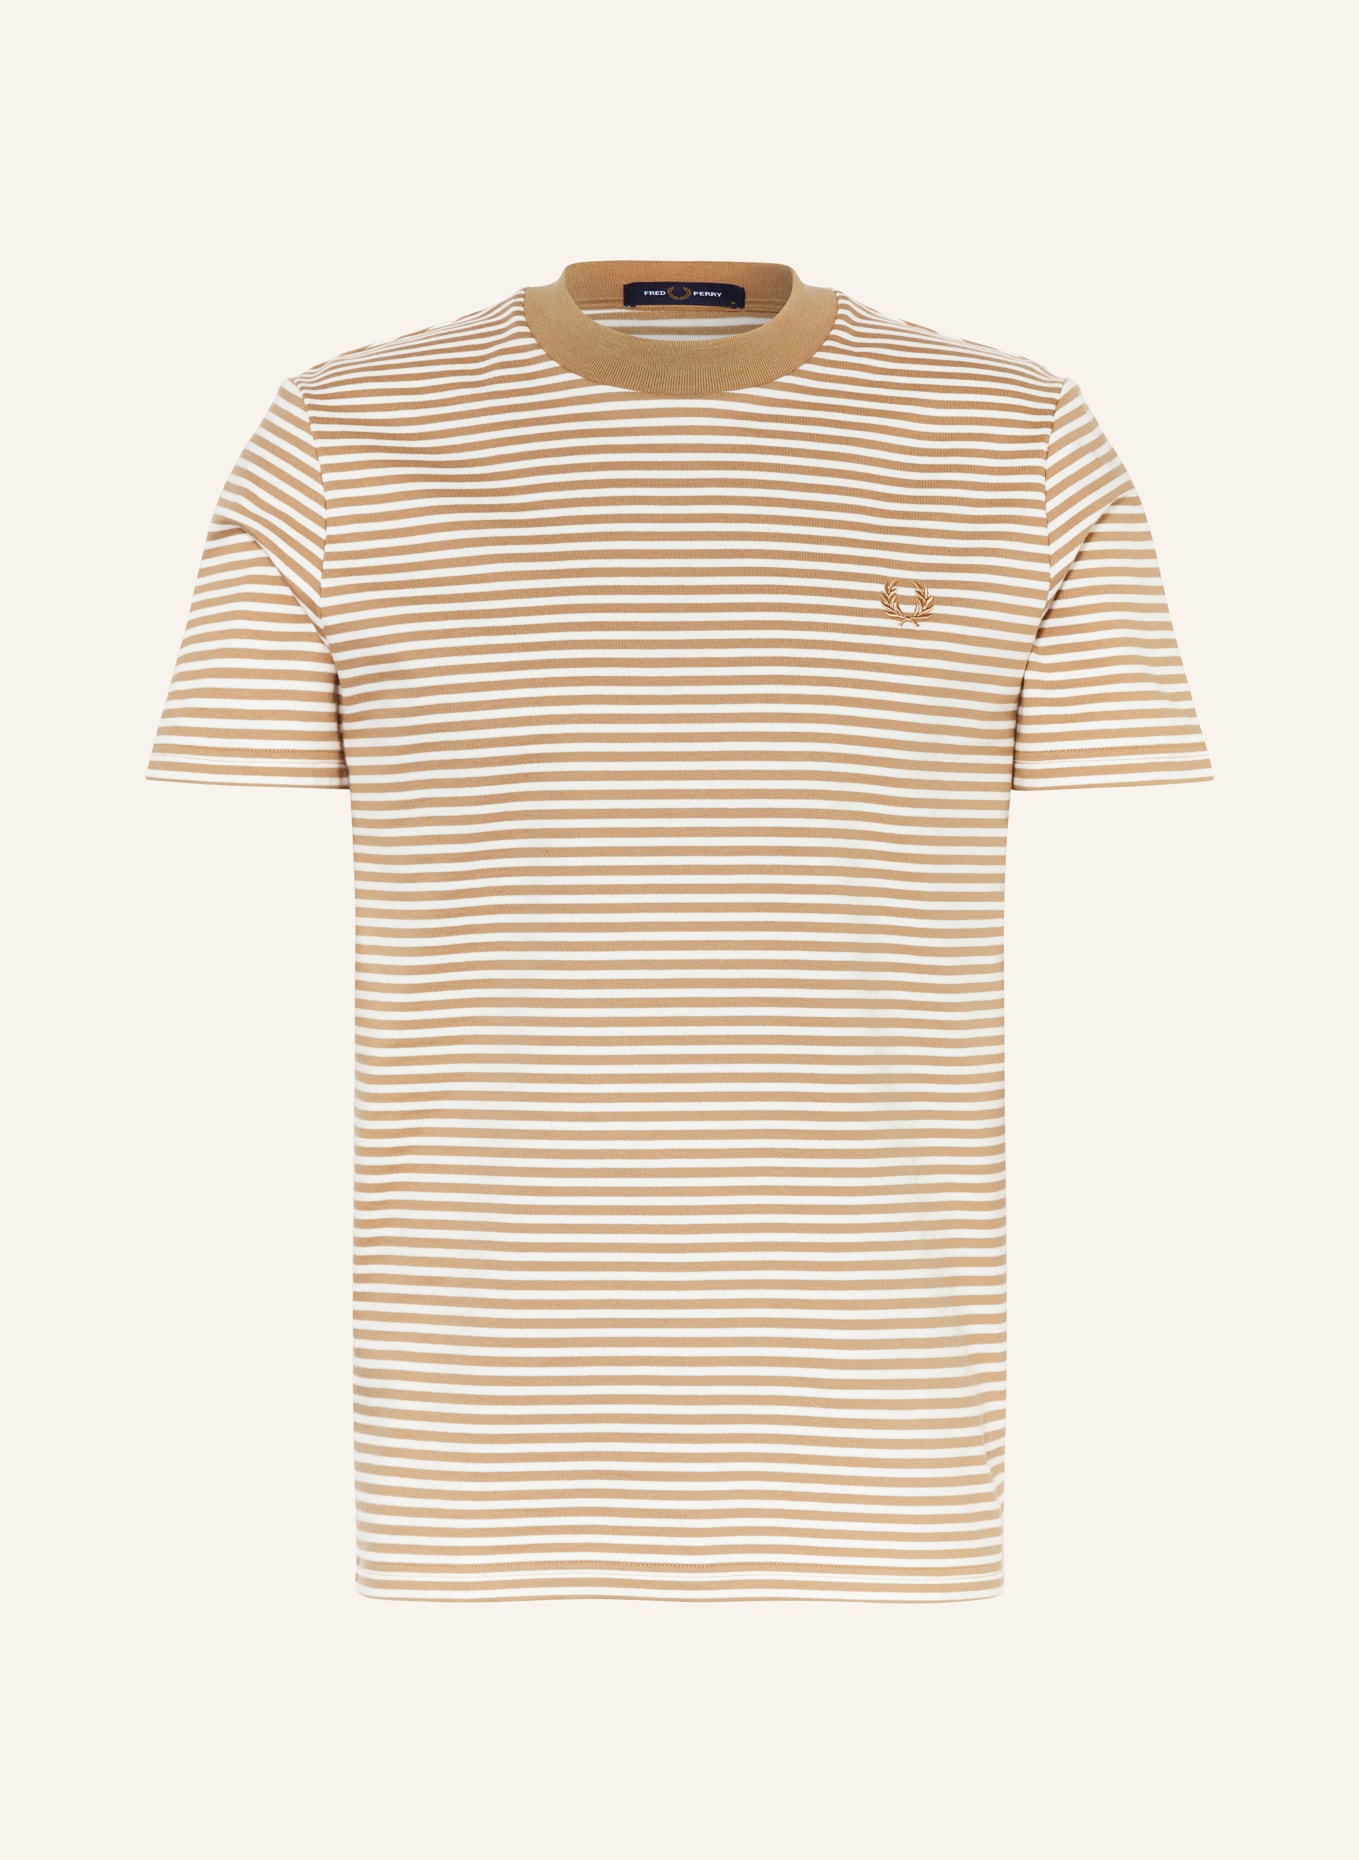 FRED PERRY T-Shirt, Farbe: BEIGE/ WEISS (Bild 1)